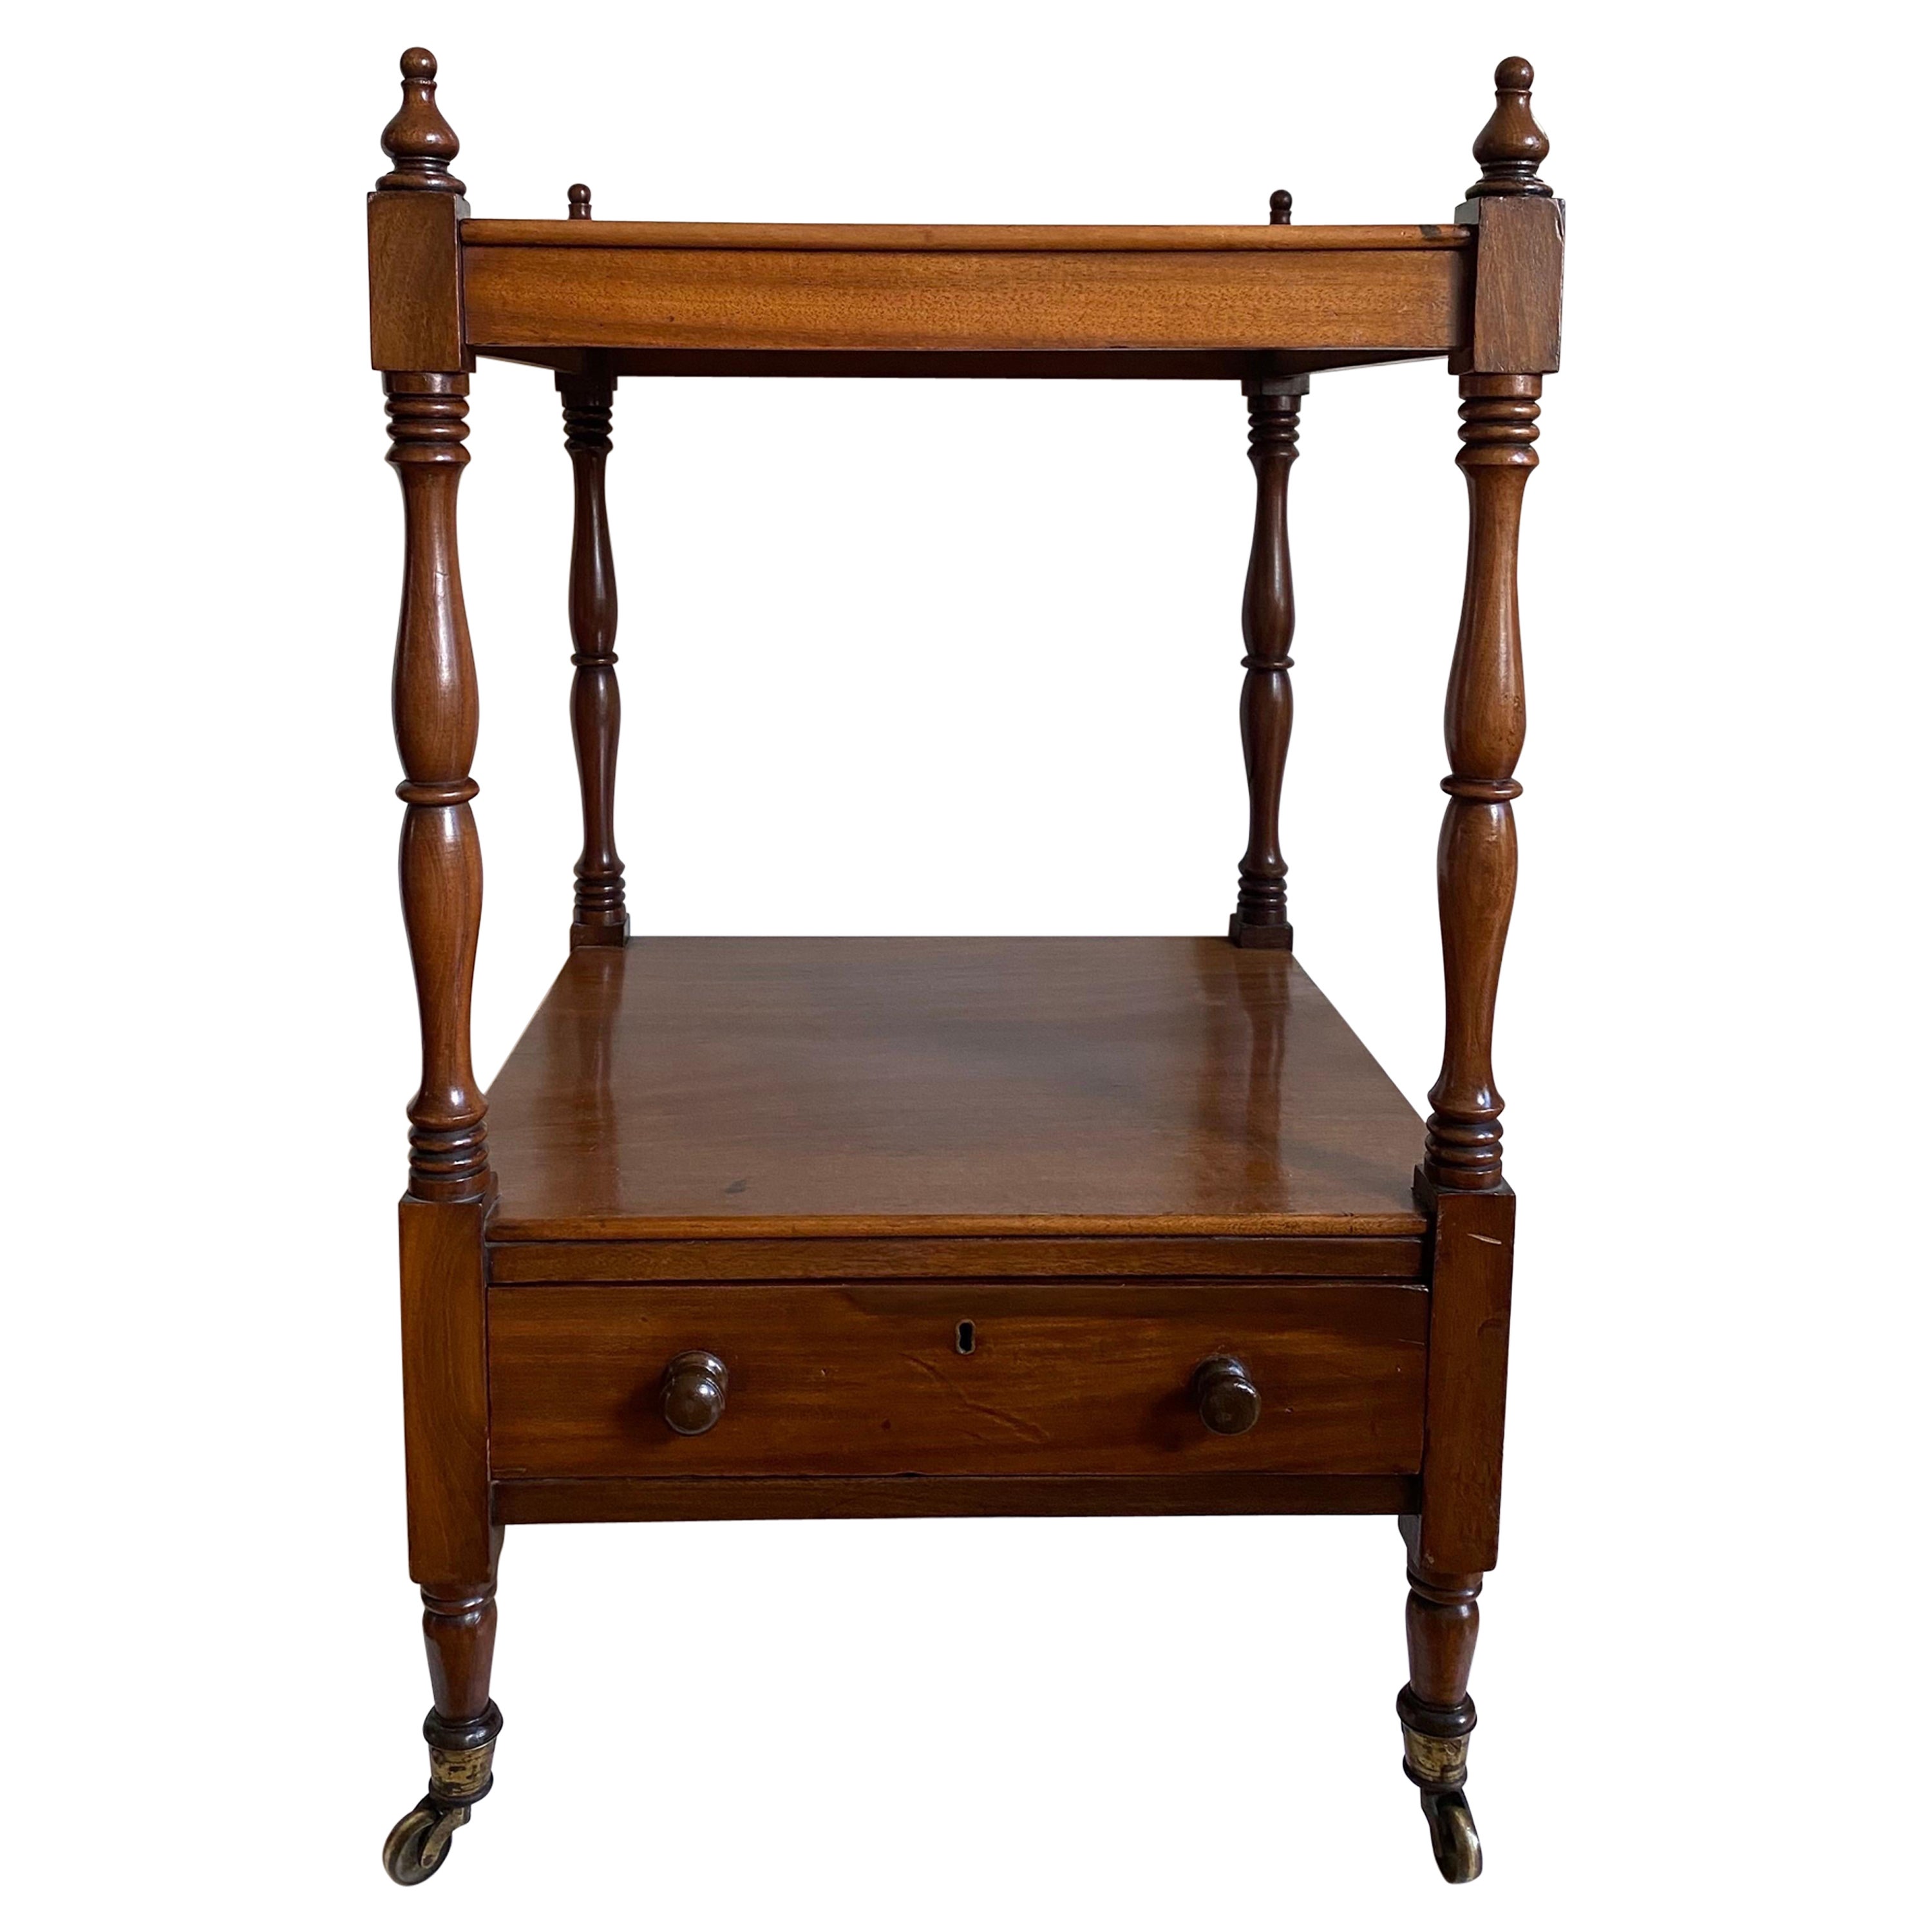 Antique English Regency Mahogany Etagere Trolley Table For Sale